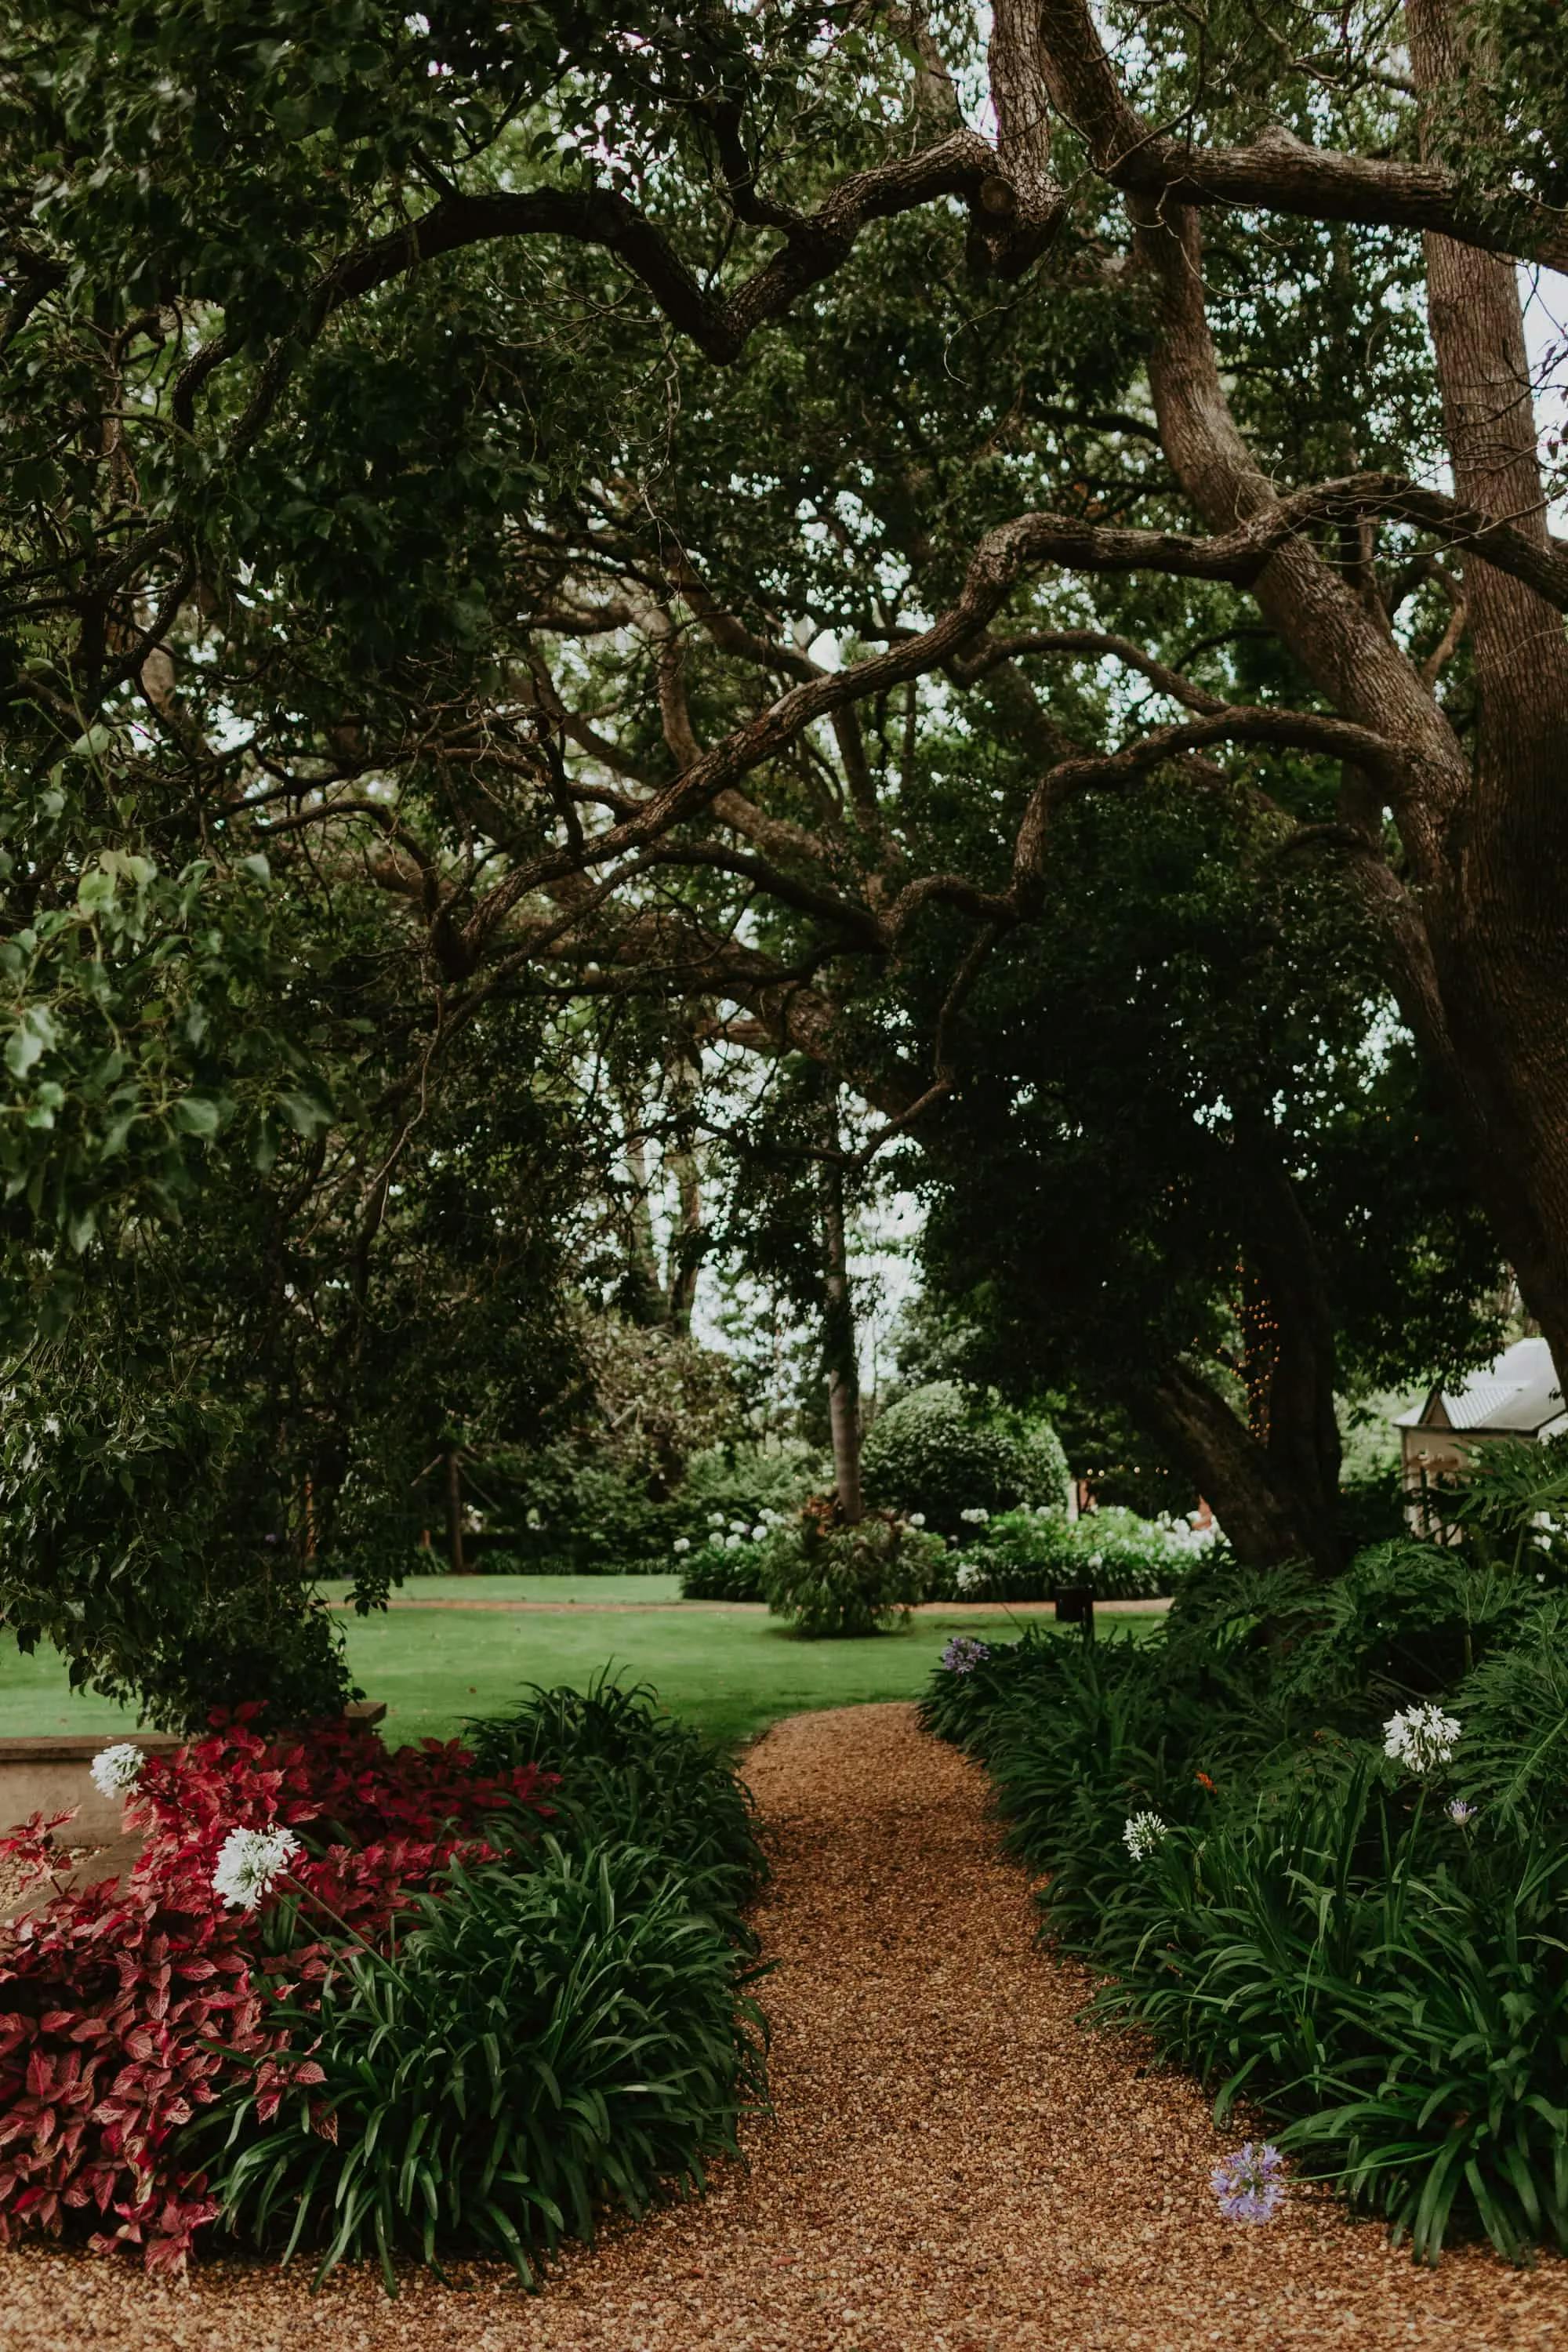 A garden path made of small stones winds through lush greenery and vibrant plants. Tall, leafy trees form a canopy overhead, with branches extending across the scene. Red and purple-leaved plants line the path, creating a serene and inviting atmosphere.